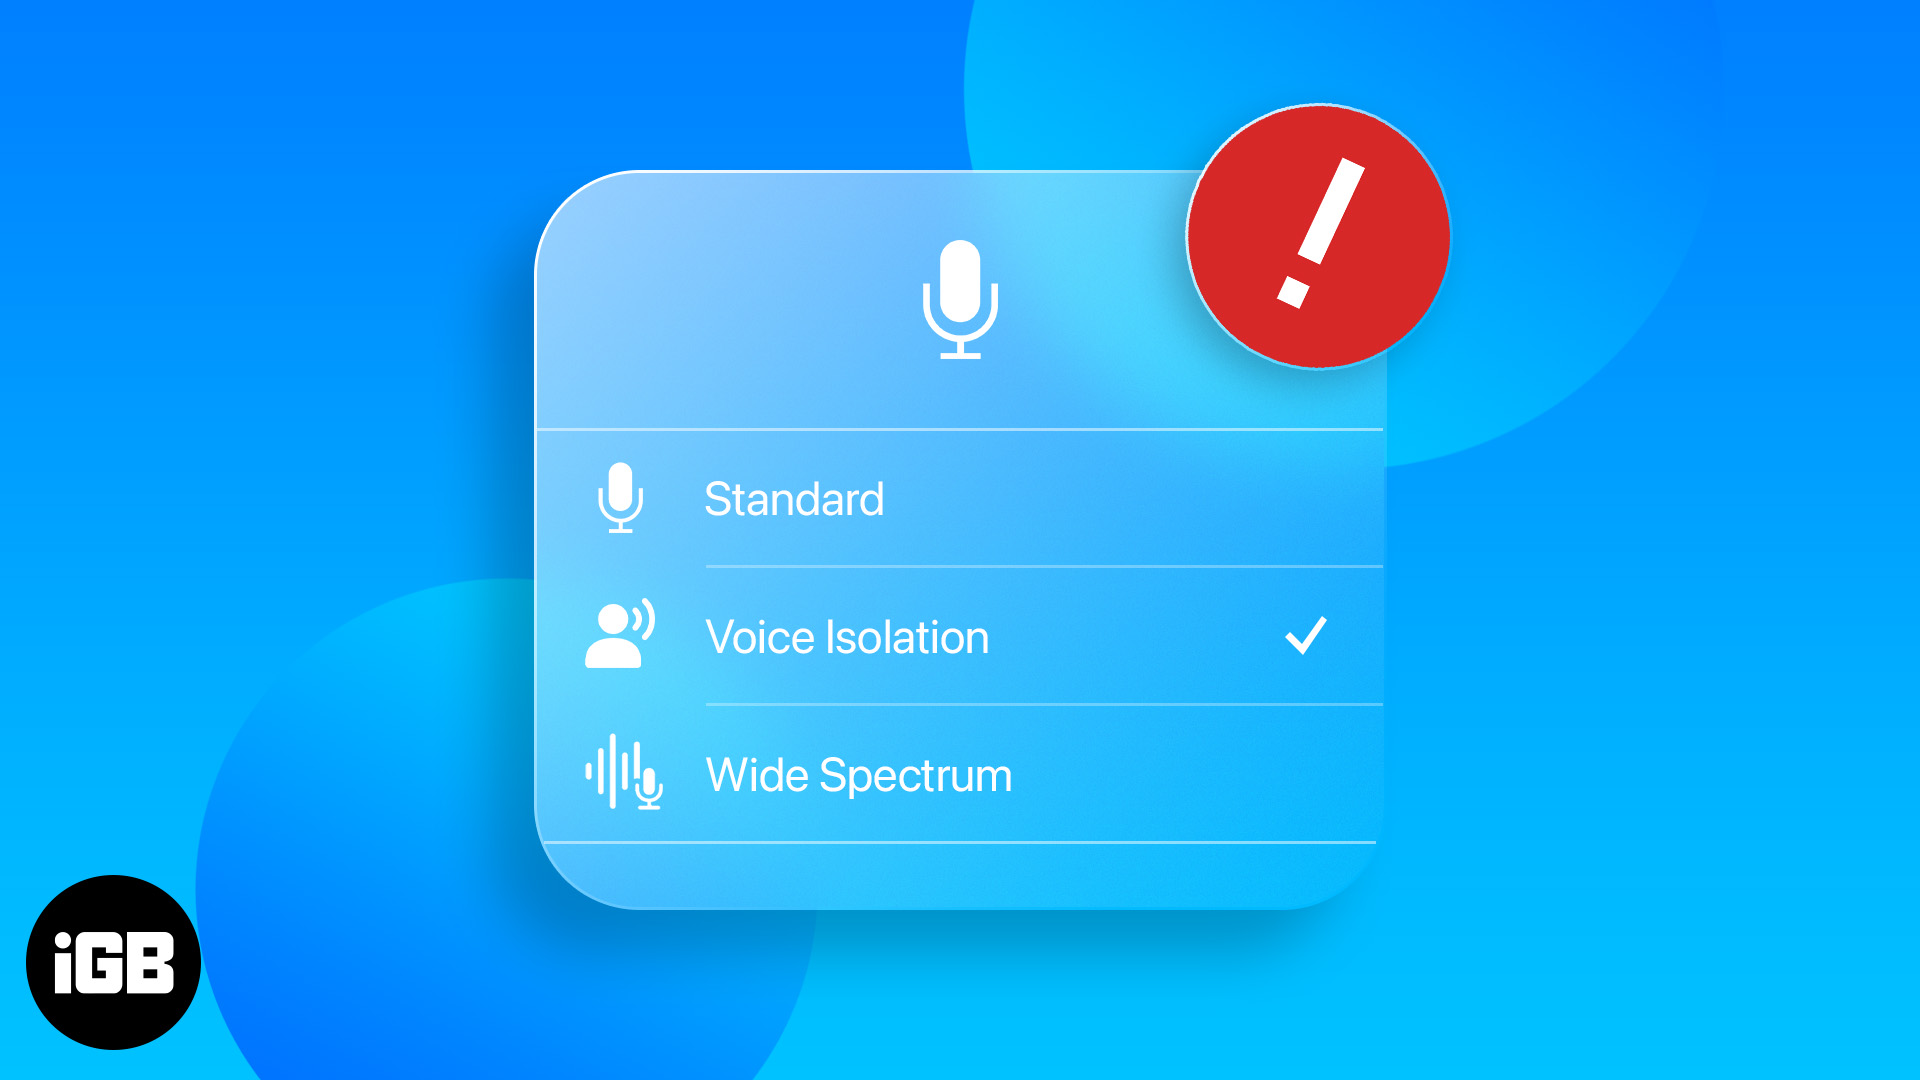 How to fix Voice Isolation not working on iPhone?